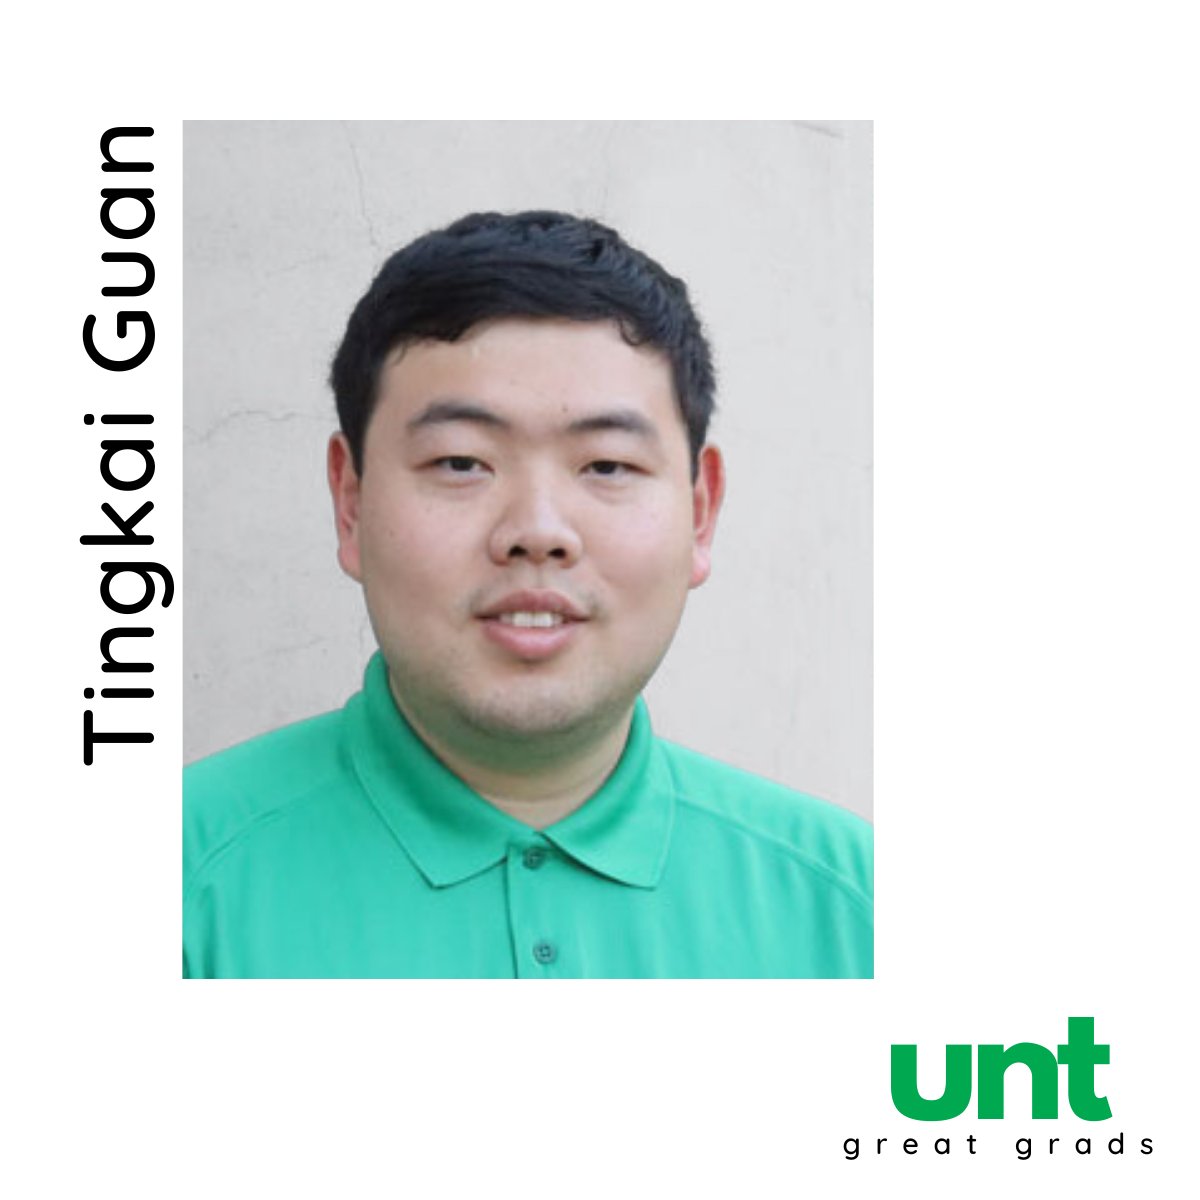 “Learning is where everyone begins their exploration of the world. That’s where I can make a difference — from the root of the human learning and educational process,” #UNTGreatGrad Tingkai Guan says. ci.unt.edu/great-grads

#UNTCOI #UNTLTECH #iSchool #UNT23 #LearningTechnology